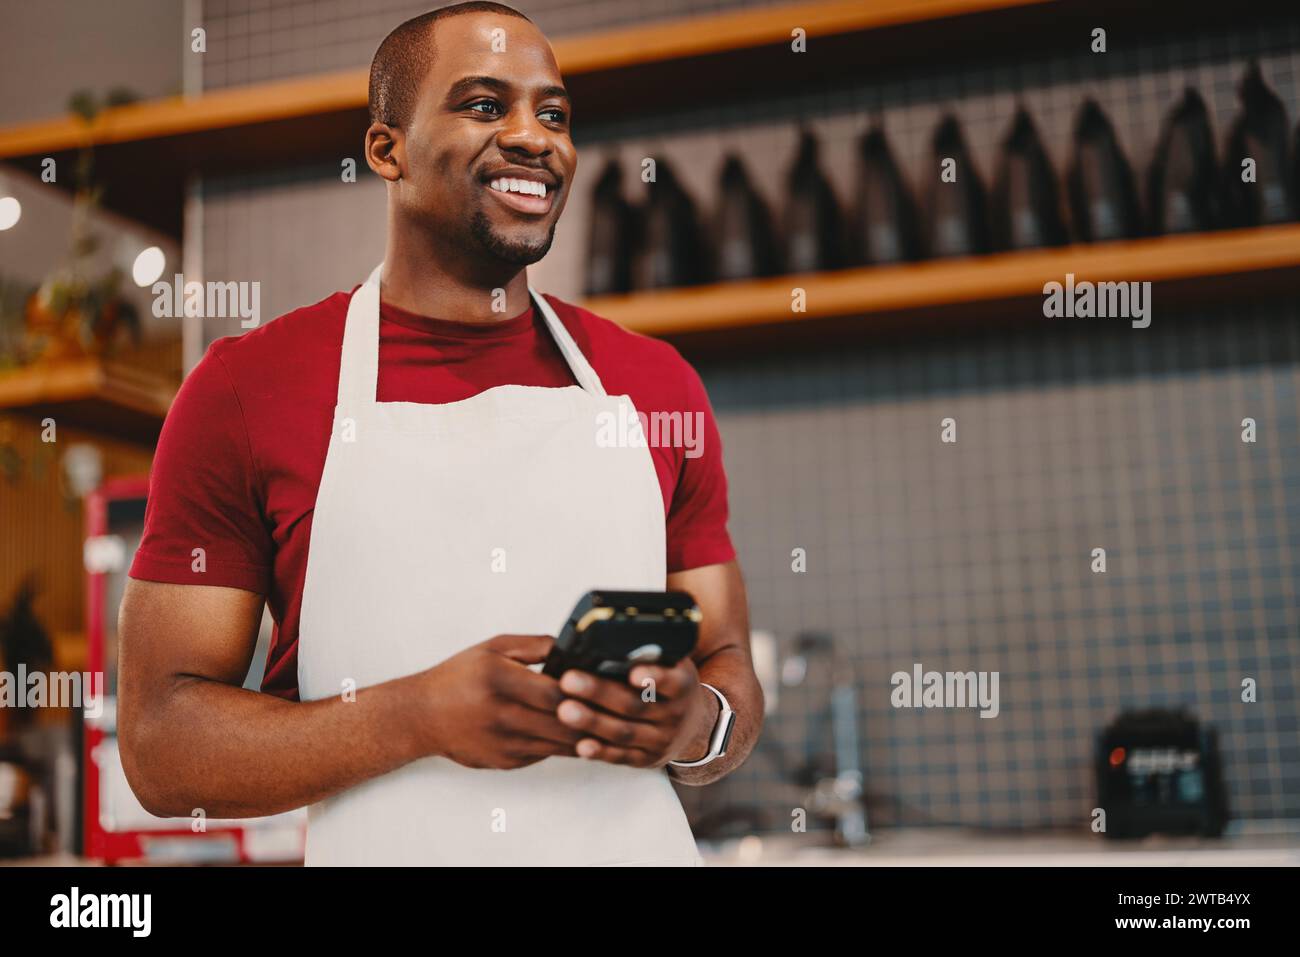 Cheerful entrepreneur holding a pos machine in a cafe, wearing a white apron. Man smiling while managing his business digitally, representing small bu Stock Photo